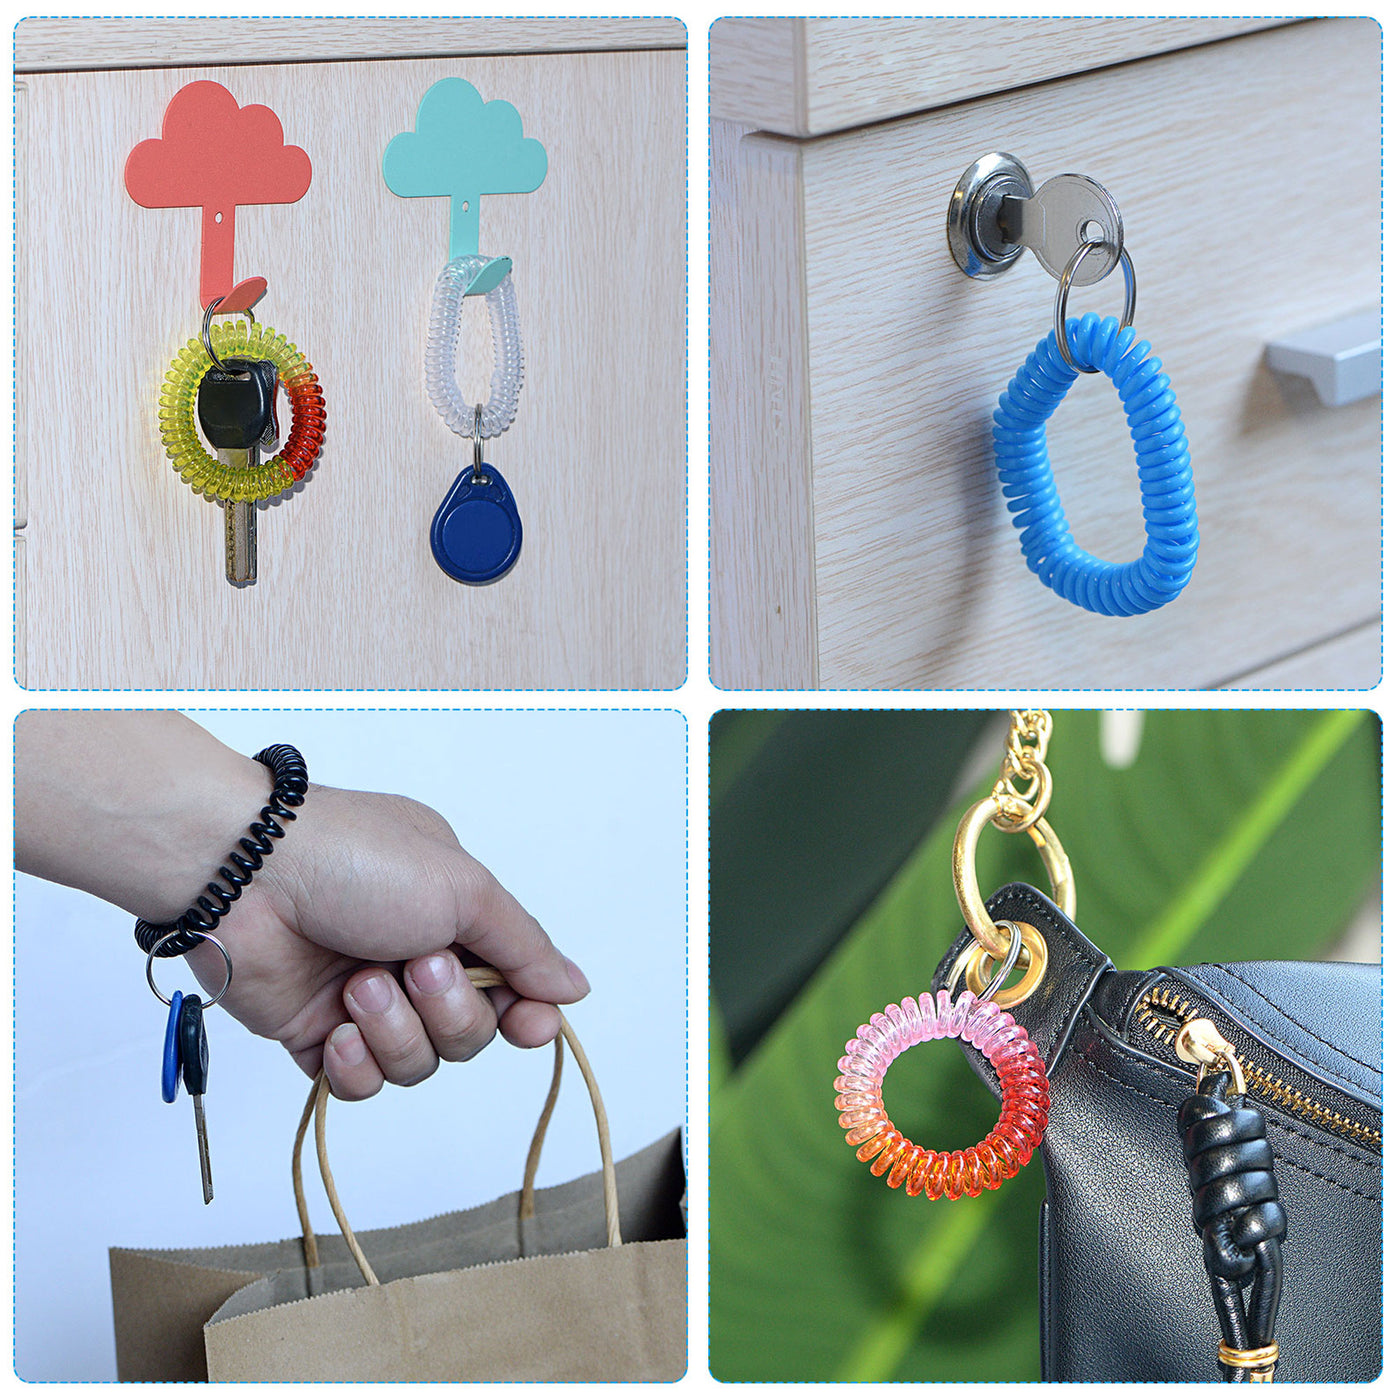 Harfington 22mm Spiral Keychain, 7 Pack Plastic Wrist Coil Wristband Stretchable Key Holder Lanyard for Sports Outdoor